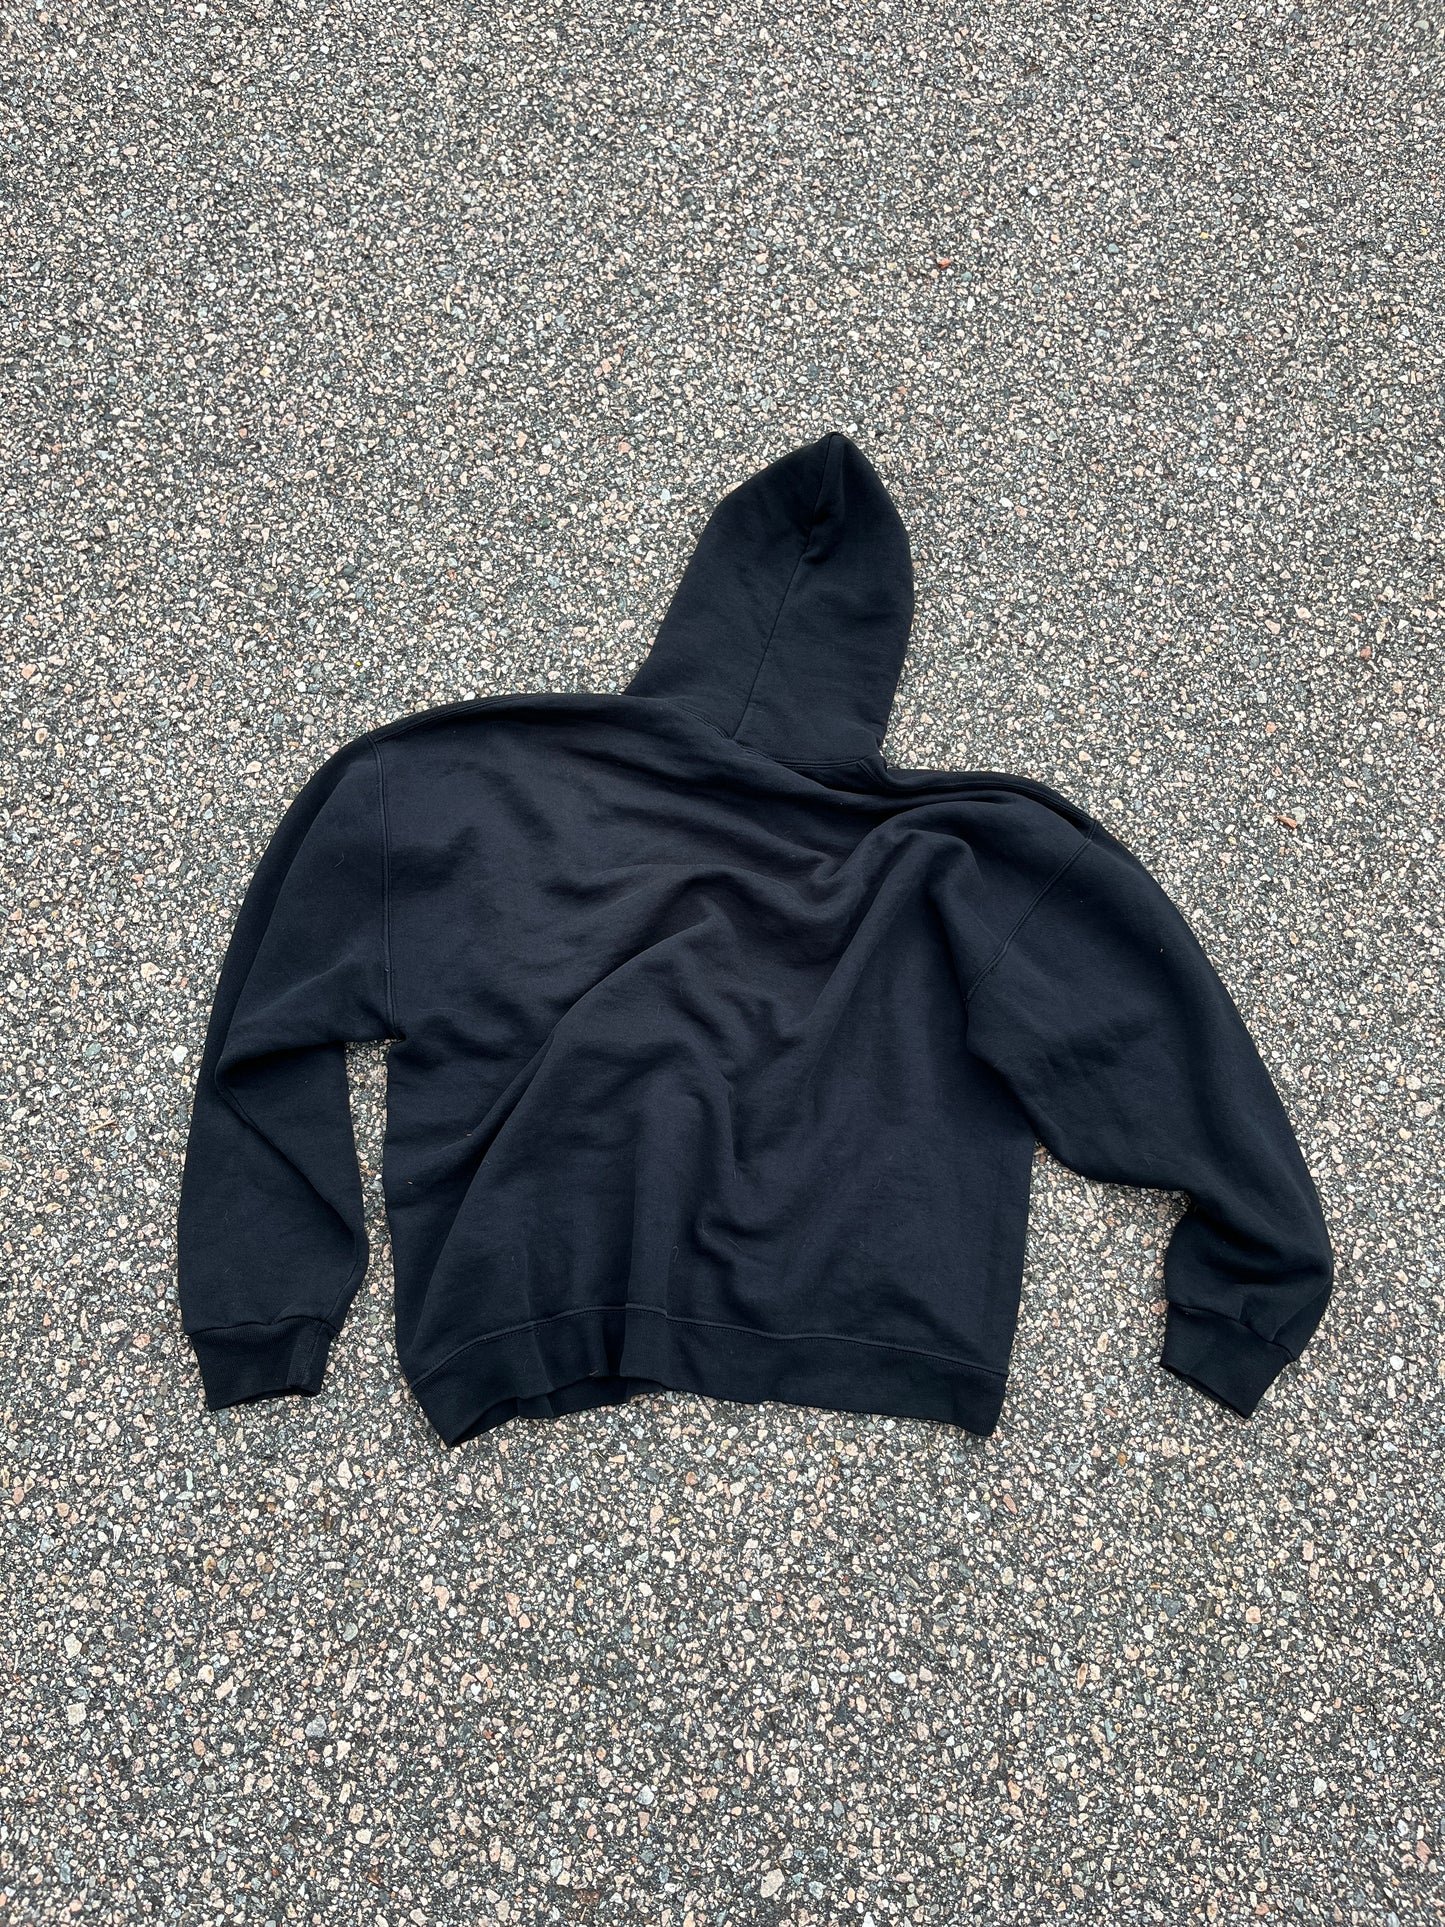 90’s Faded Black Russell Hoodie - Boxy XL